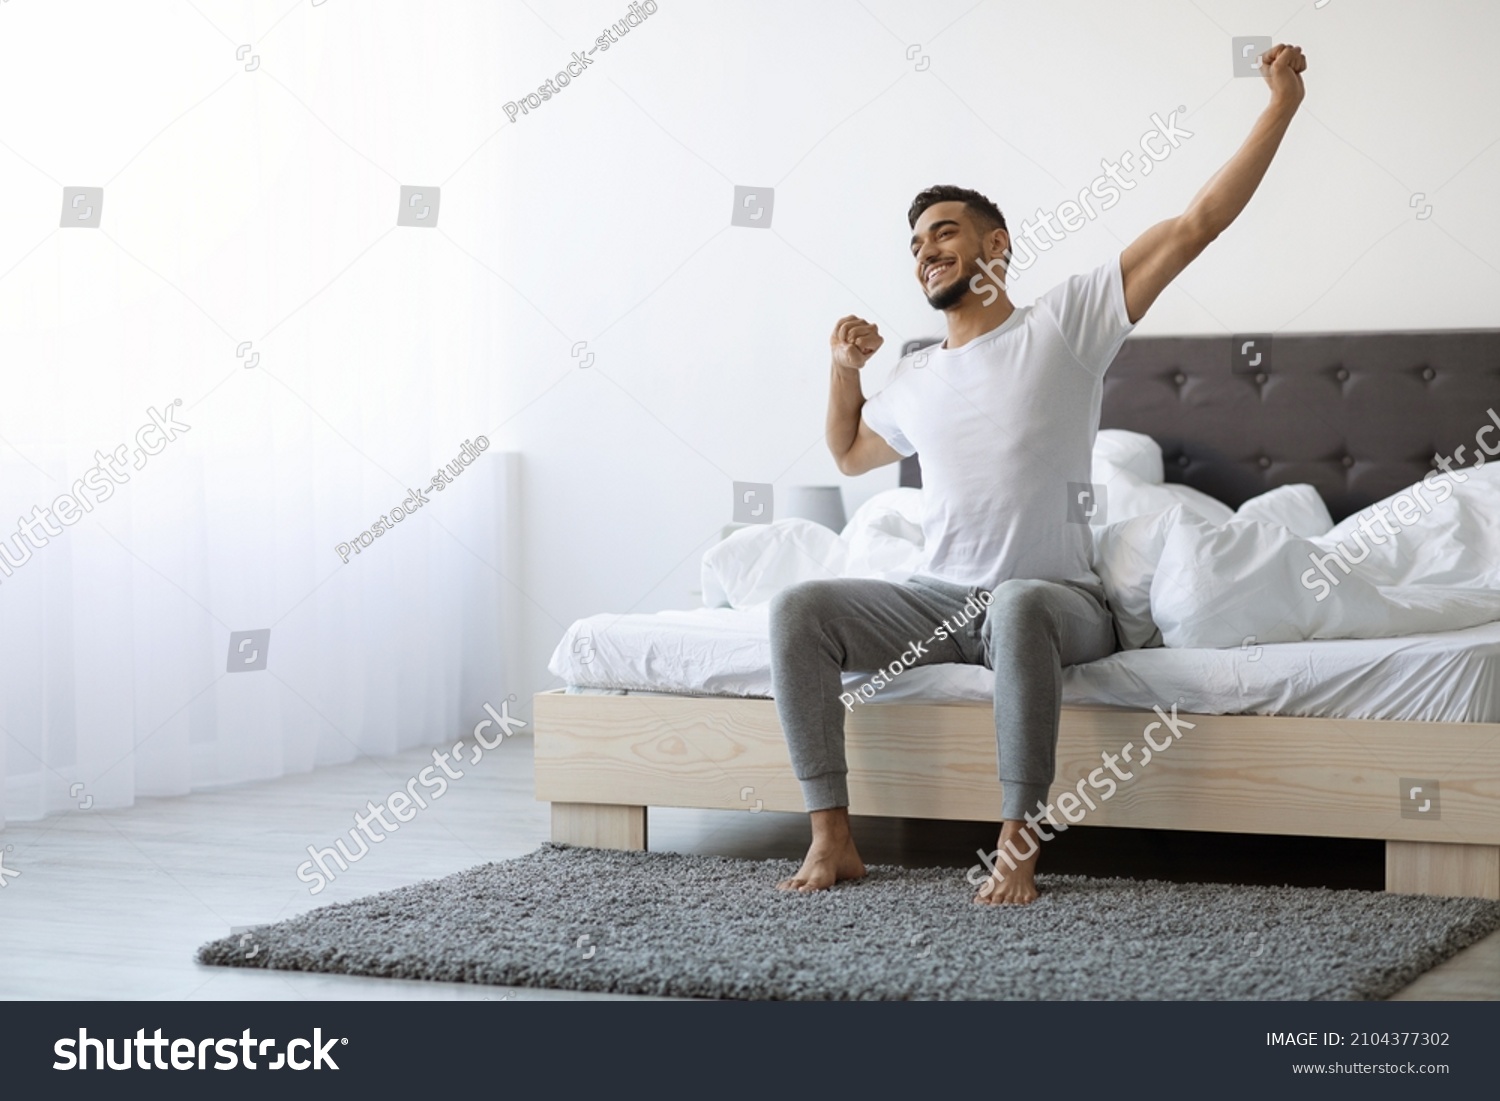 Good Morning. Happy Millennial Arab Guy Sitting On Bed And Stretching After Good Sleep, Handsome Smiling Young Middle Eastern Man Relaxing In Cozy Bedroom, Enjoying Home Comfort, Copy Space #2104377302